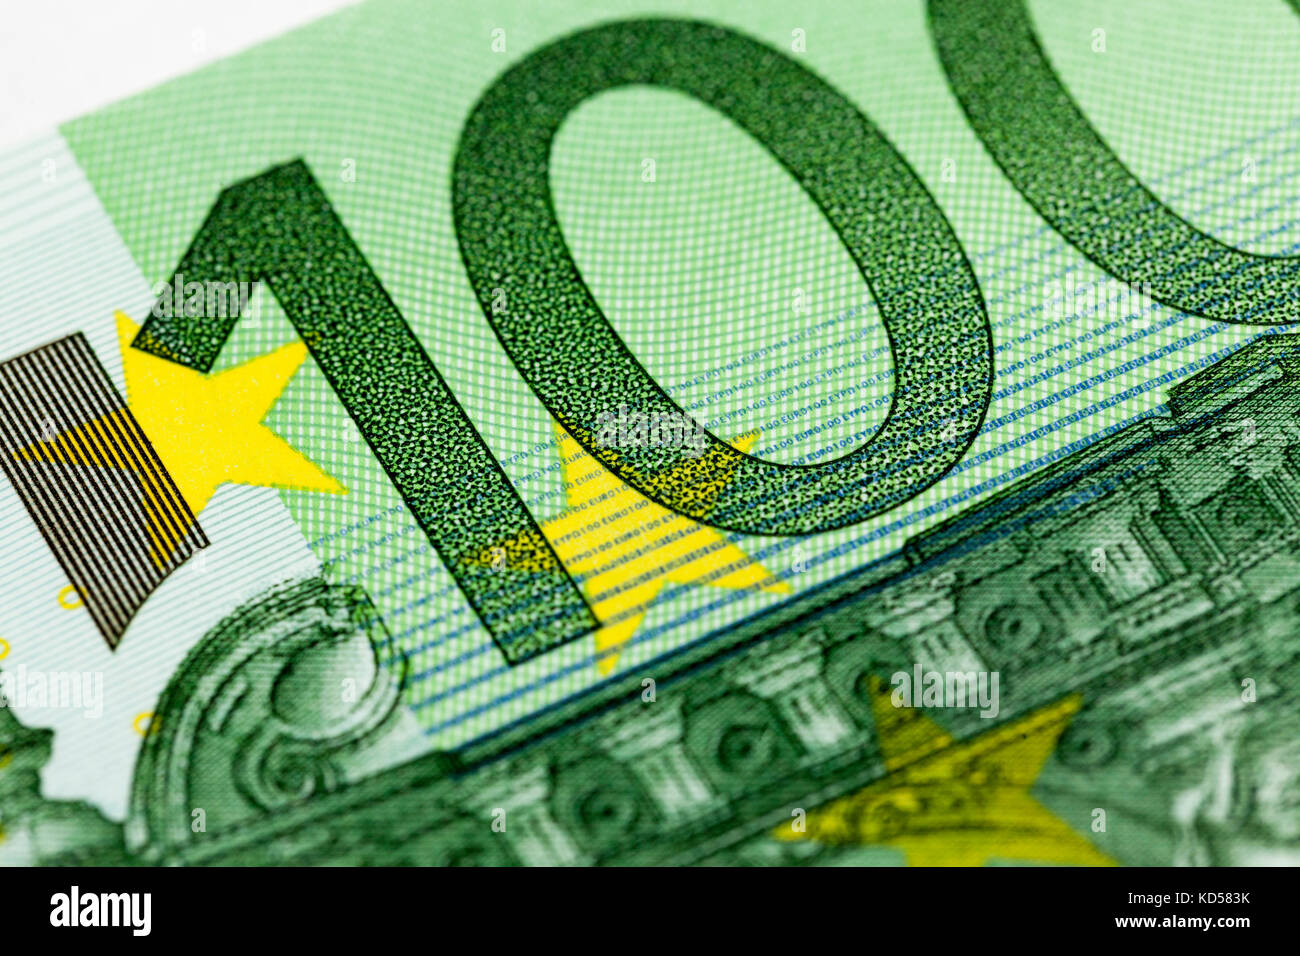 One hundred euros, green color Stock Photo